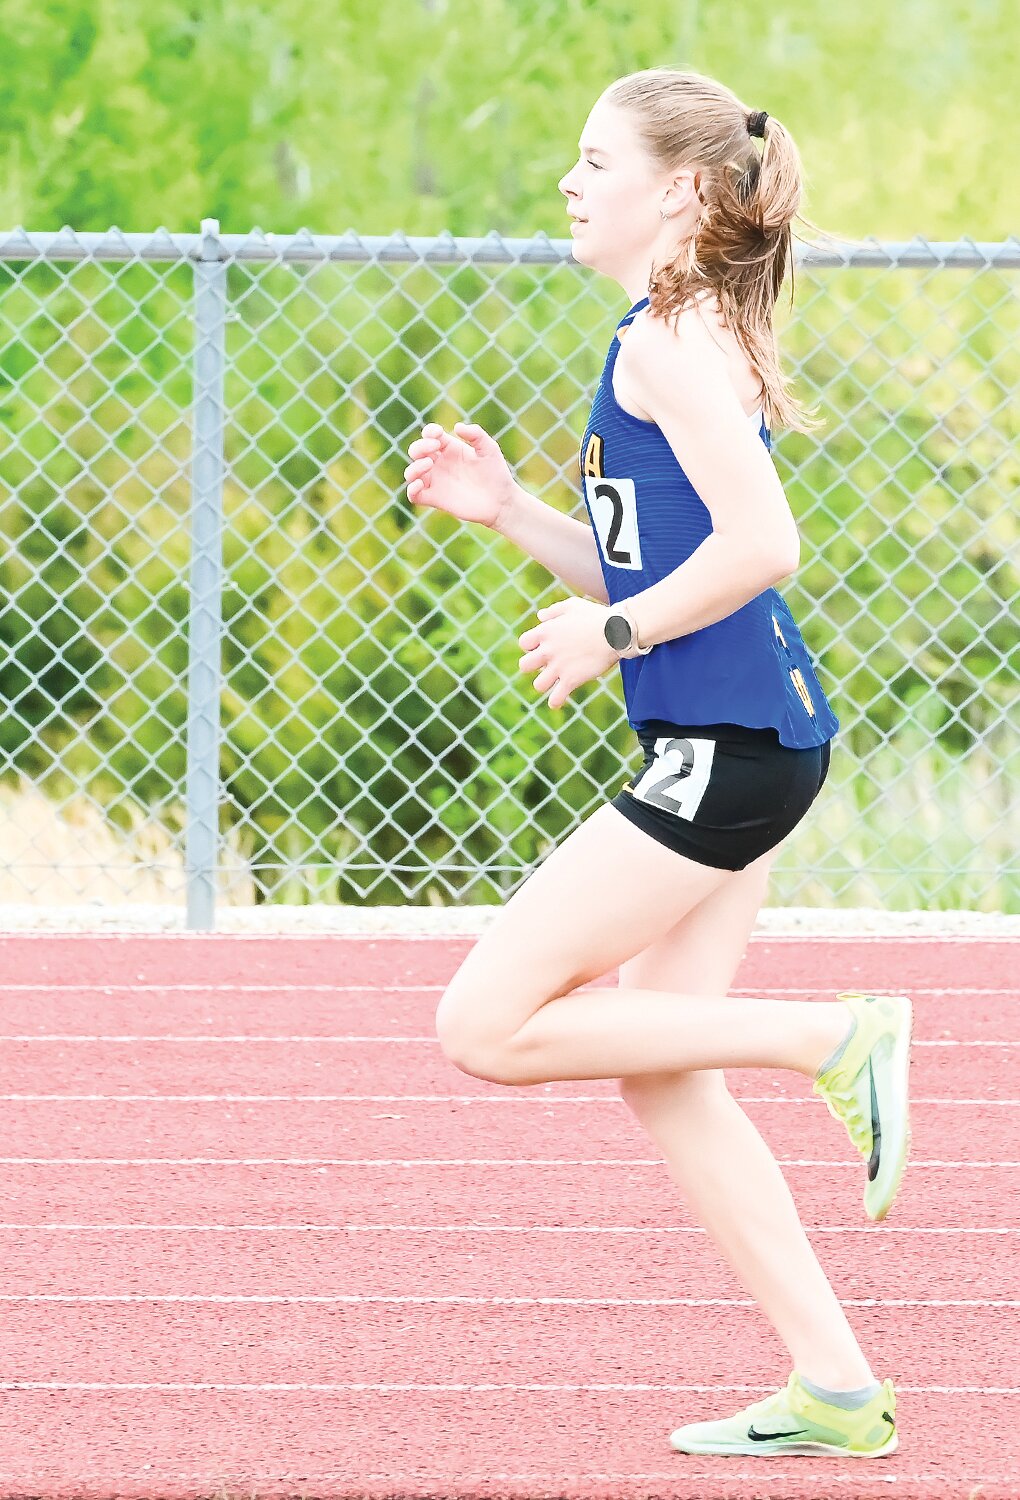 Lauren Berhorst was a double conference champ, winning the 1600m run (PR 5:51), and the 3200m (12:44). The Fatima Comets and Lady Comets won 11 events between them and claimed the team championships.